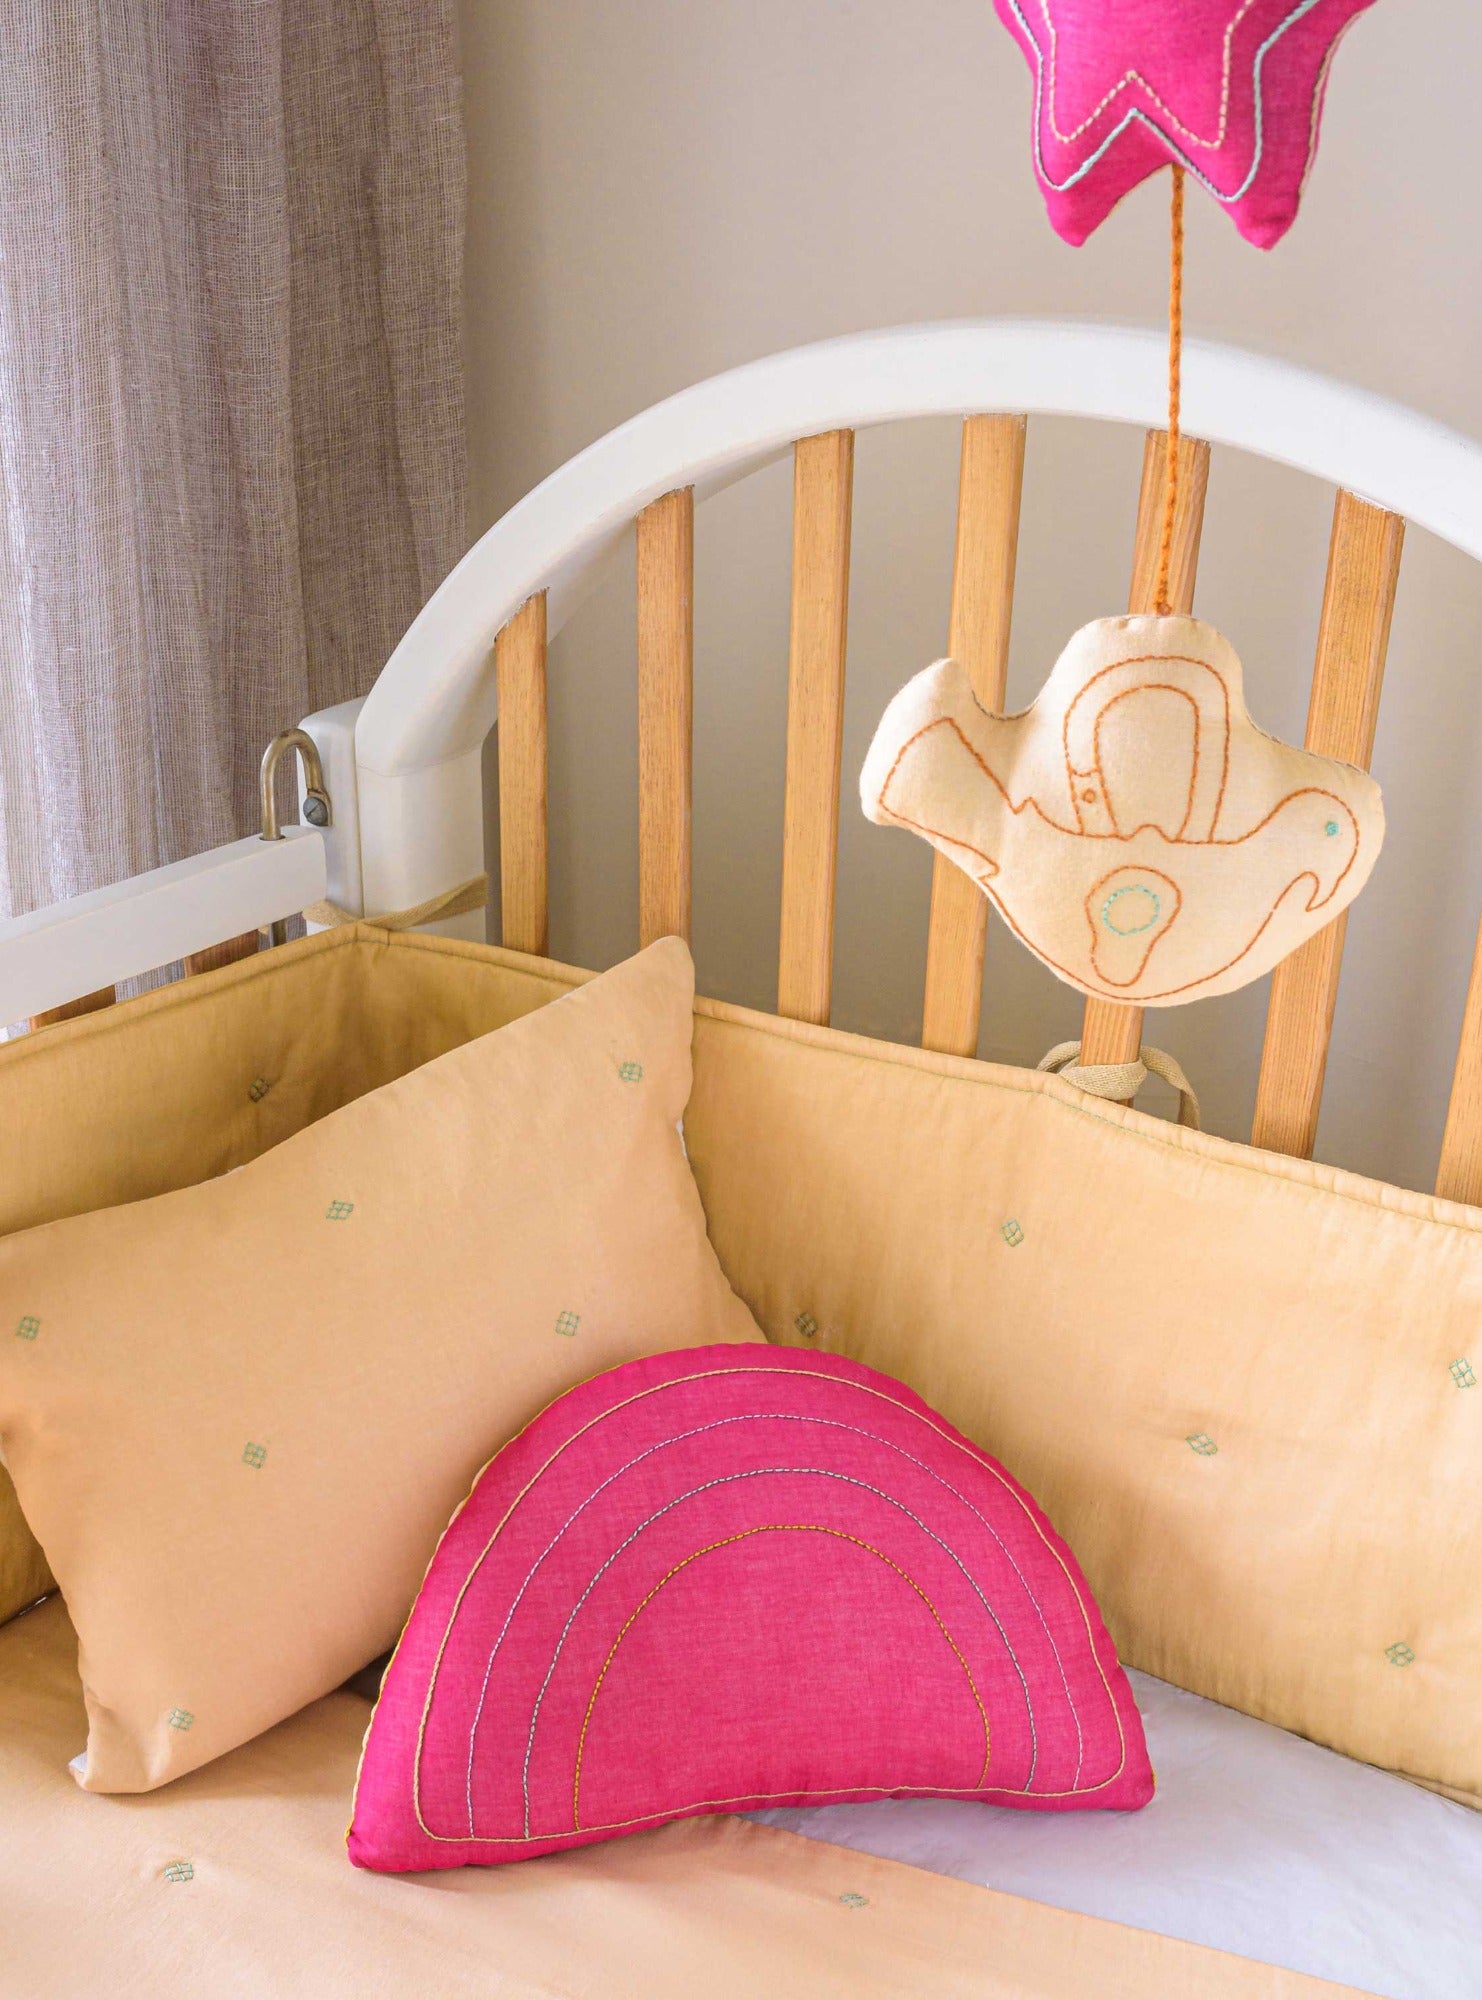 Wheat Bandook pillowcase, bumper, blanket and mobile with Fuchsia rainbow cushion all placed on a baby crib